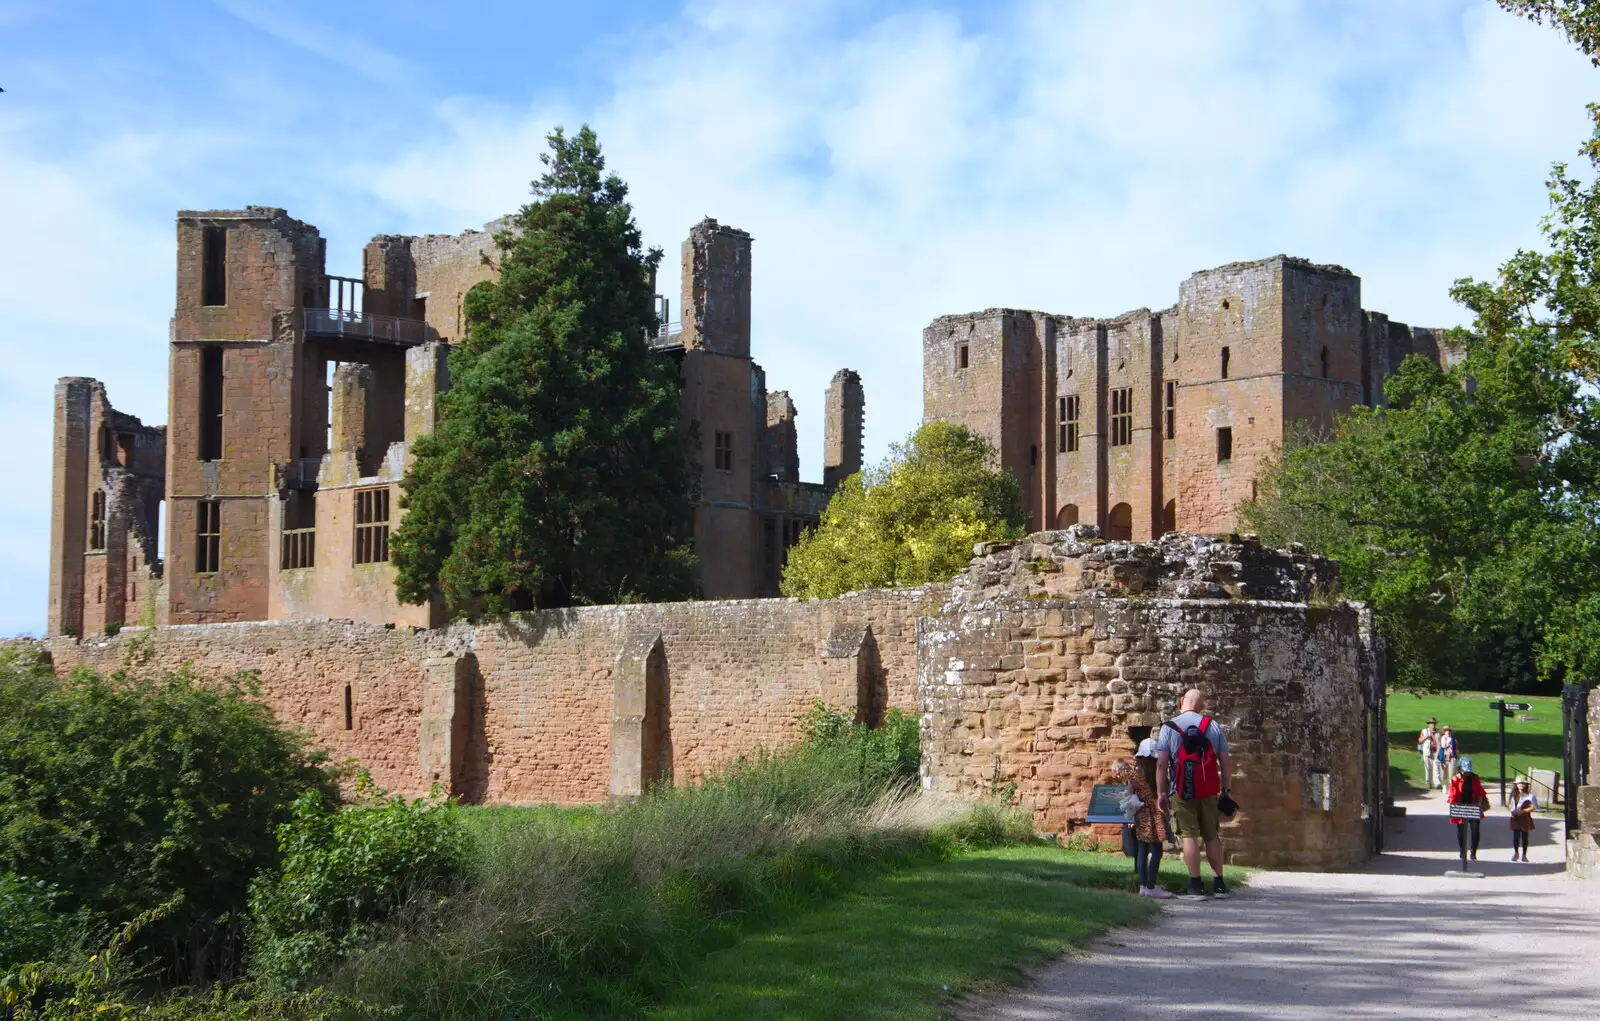 The grand sandstone ruins of Kenilworth Castle, from Kenilworth Castle and the 69th Entry Reunion Dinner, Stratford, Warwickshire - 14th September 2019